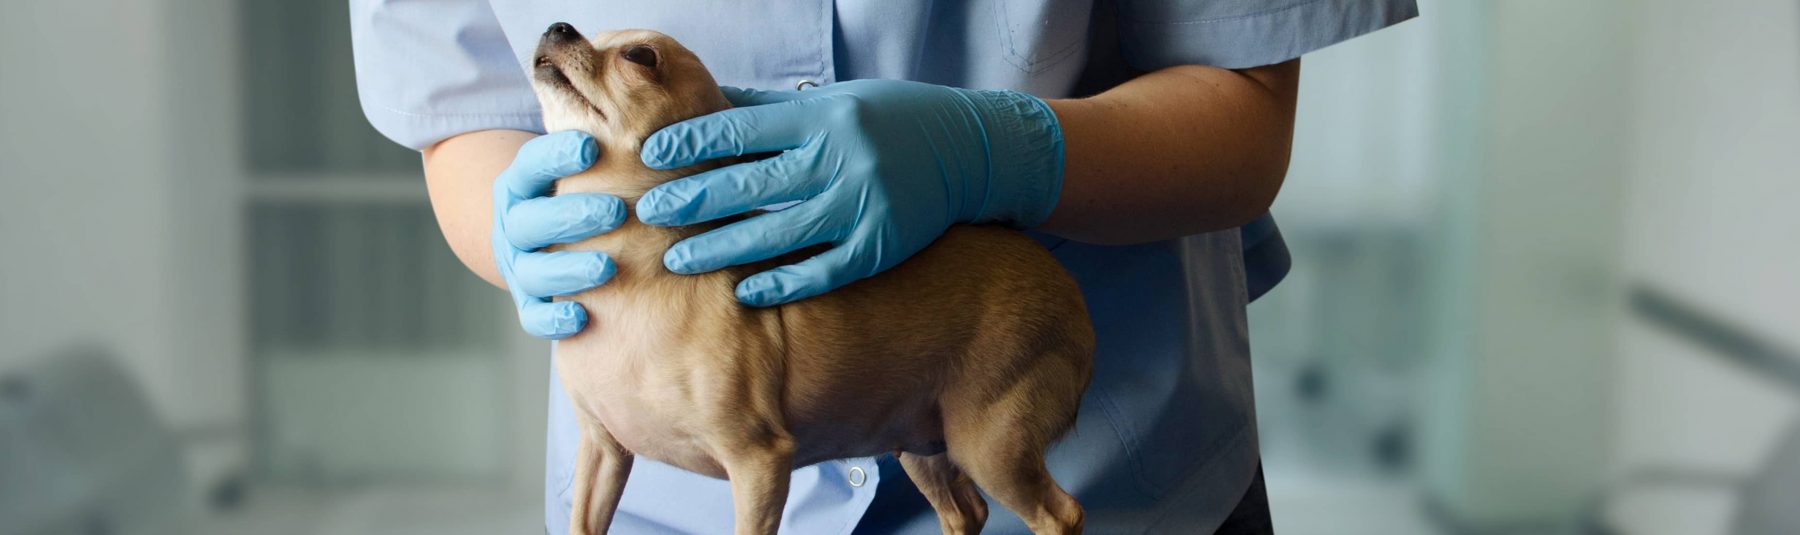 Veterinarian wearing gloves and holding a dog